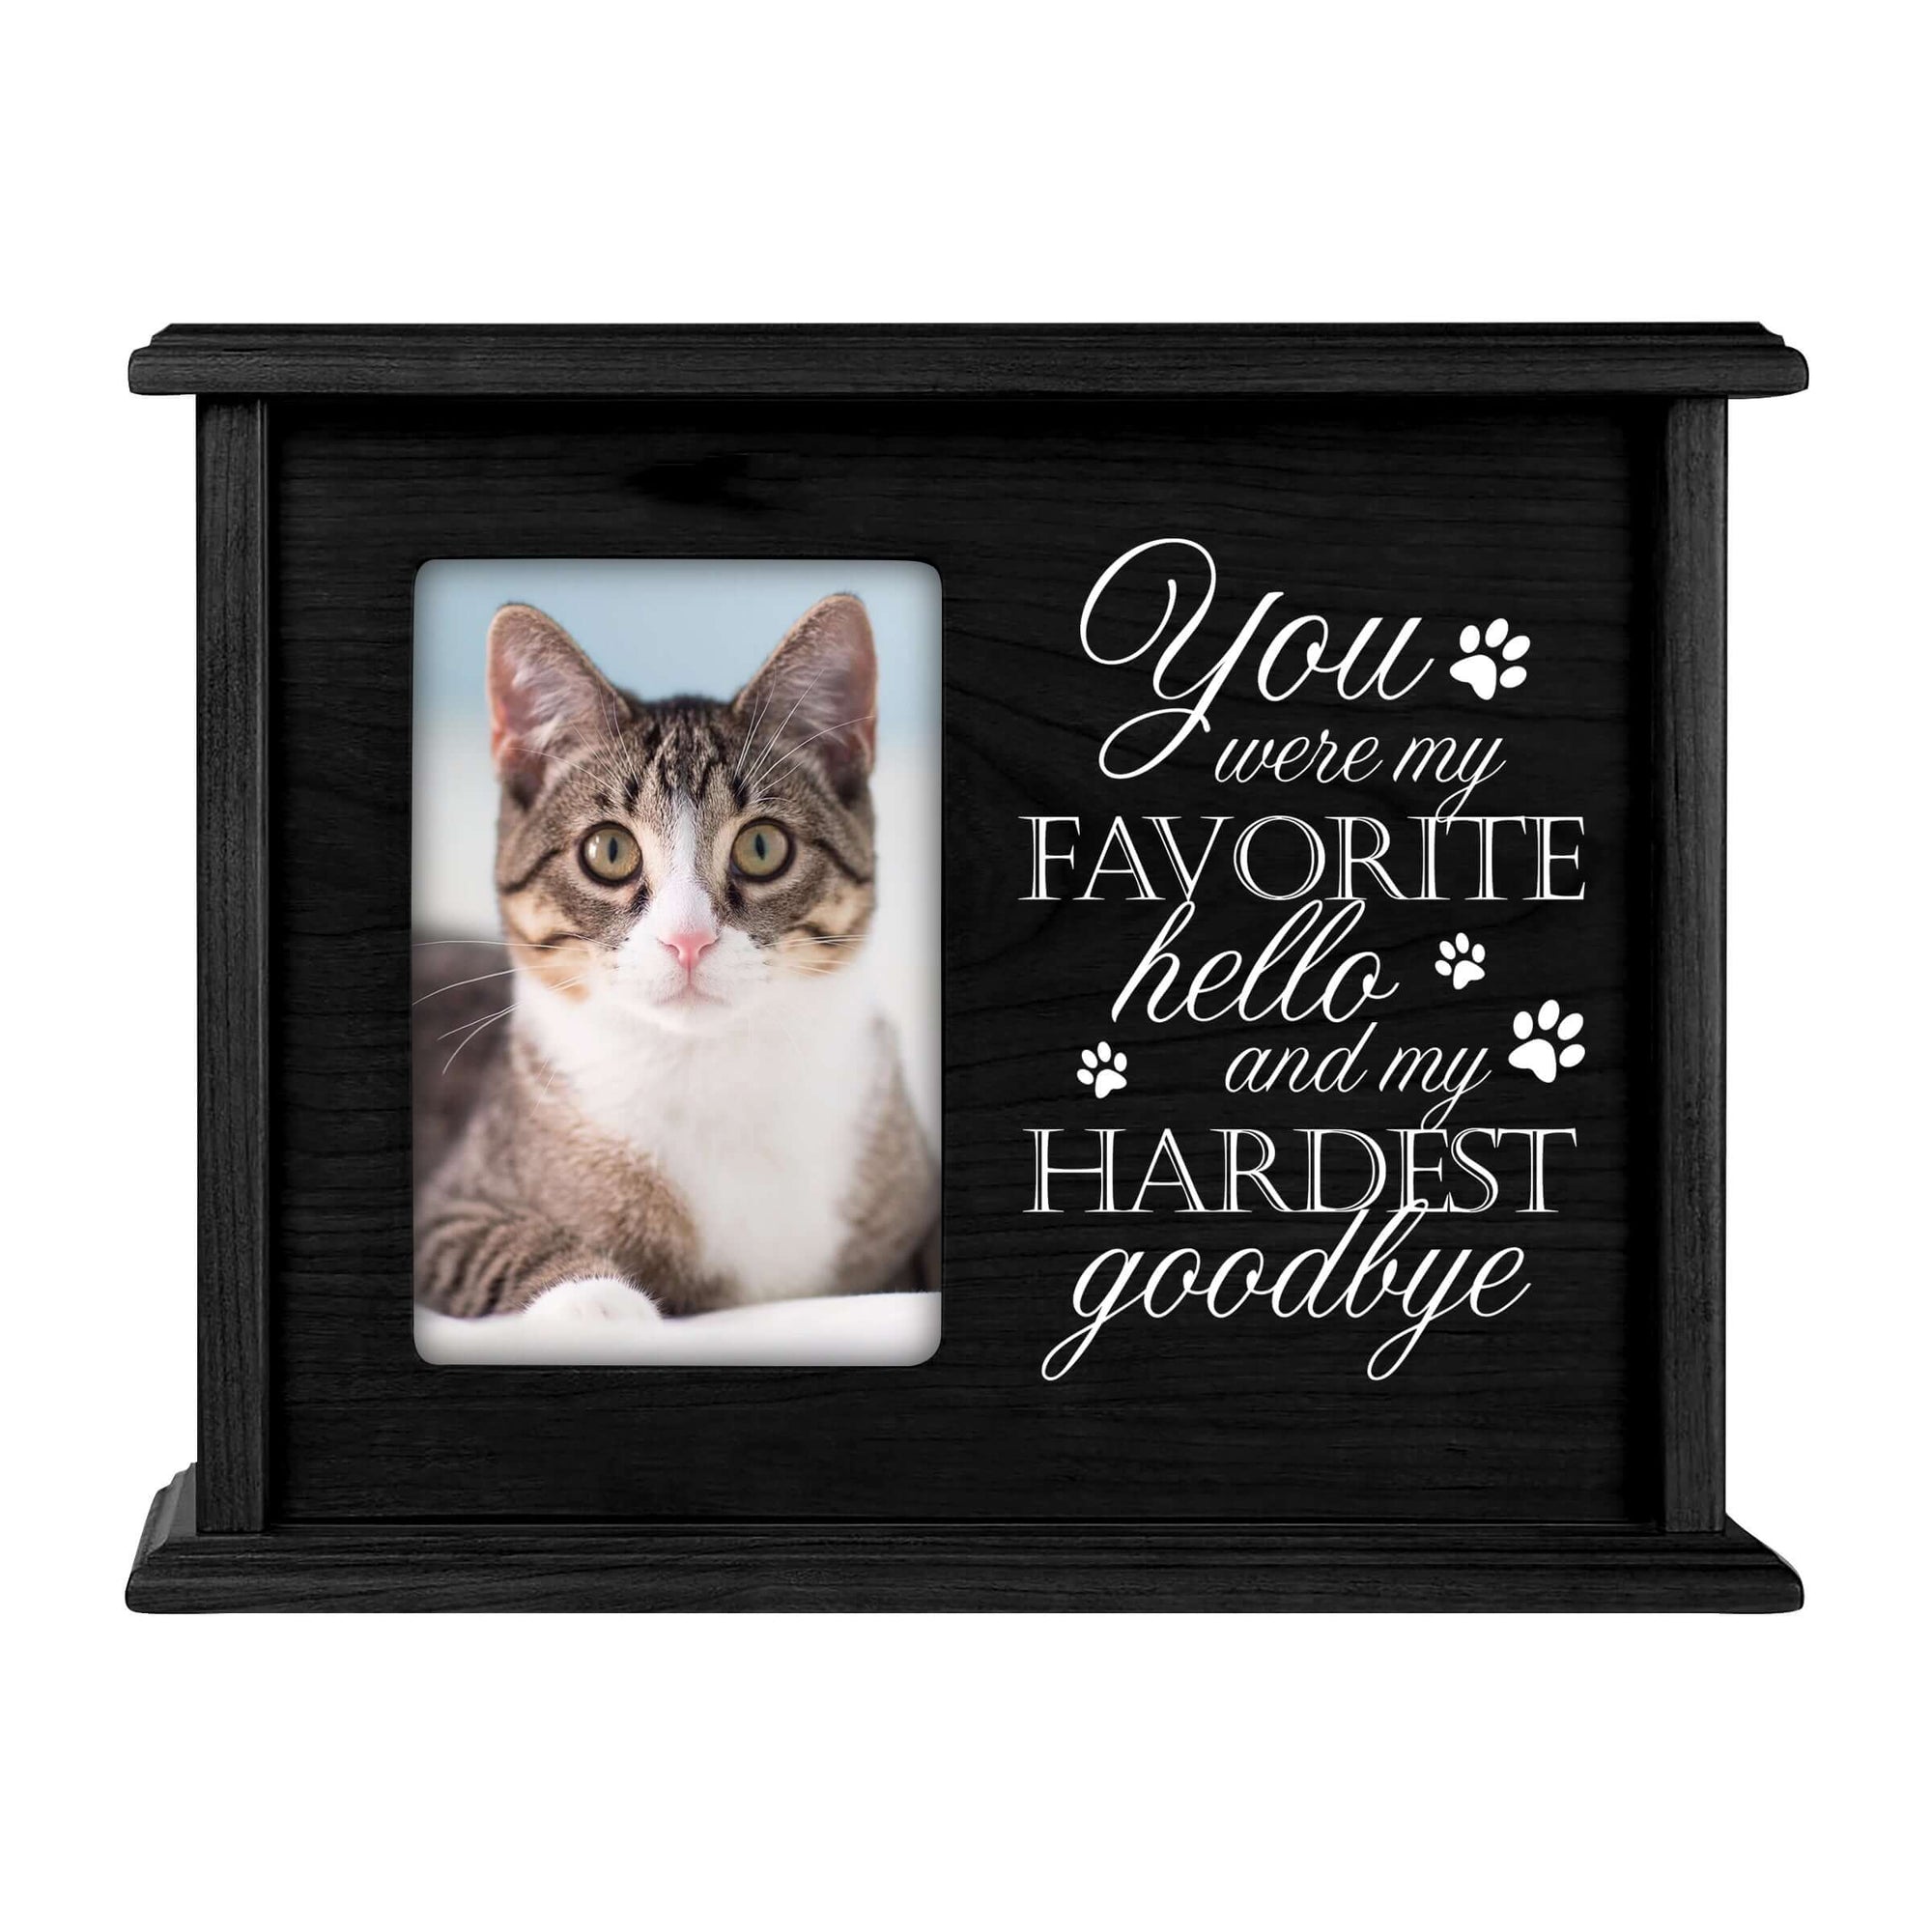 Pet Memorial Picture Cremation Urn Box for Dog or Cat - You Were My Favorite Hello